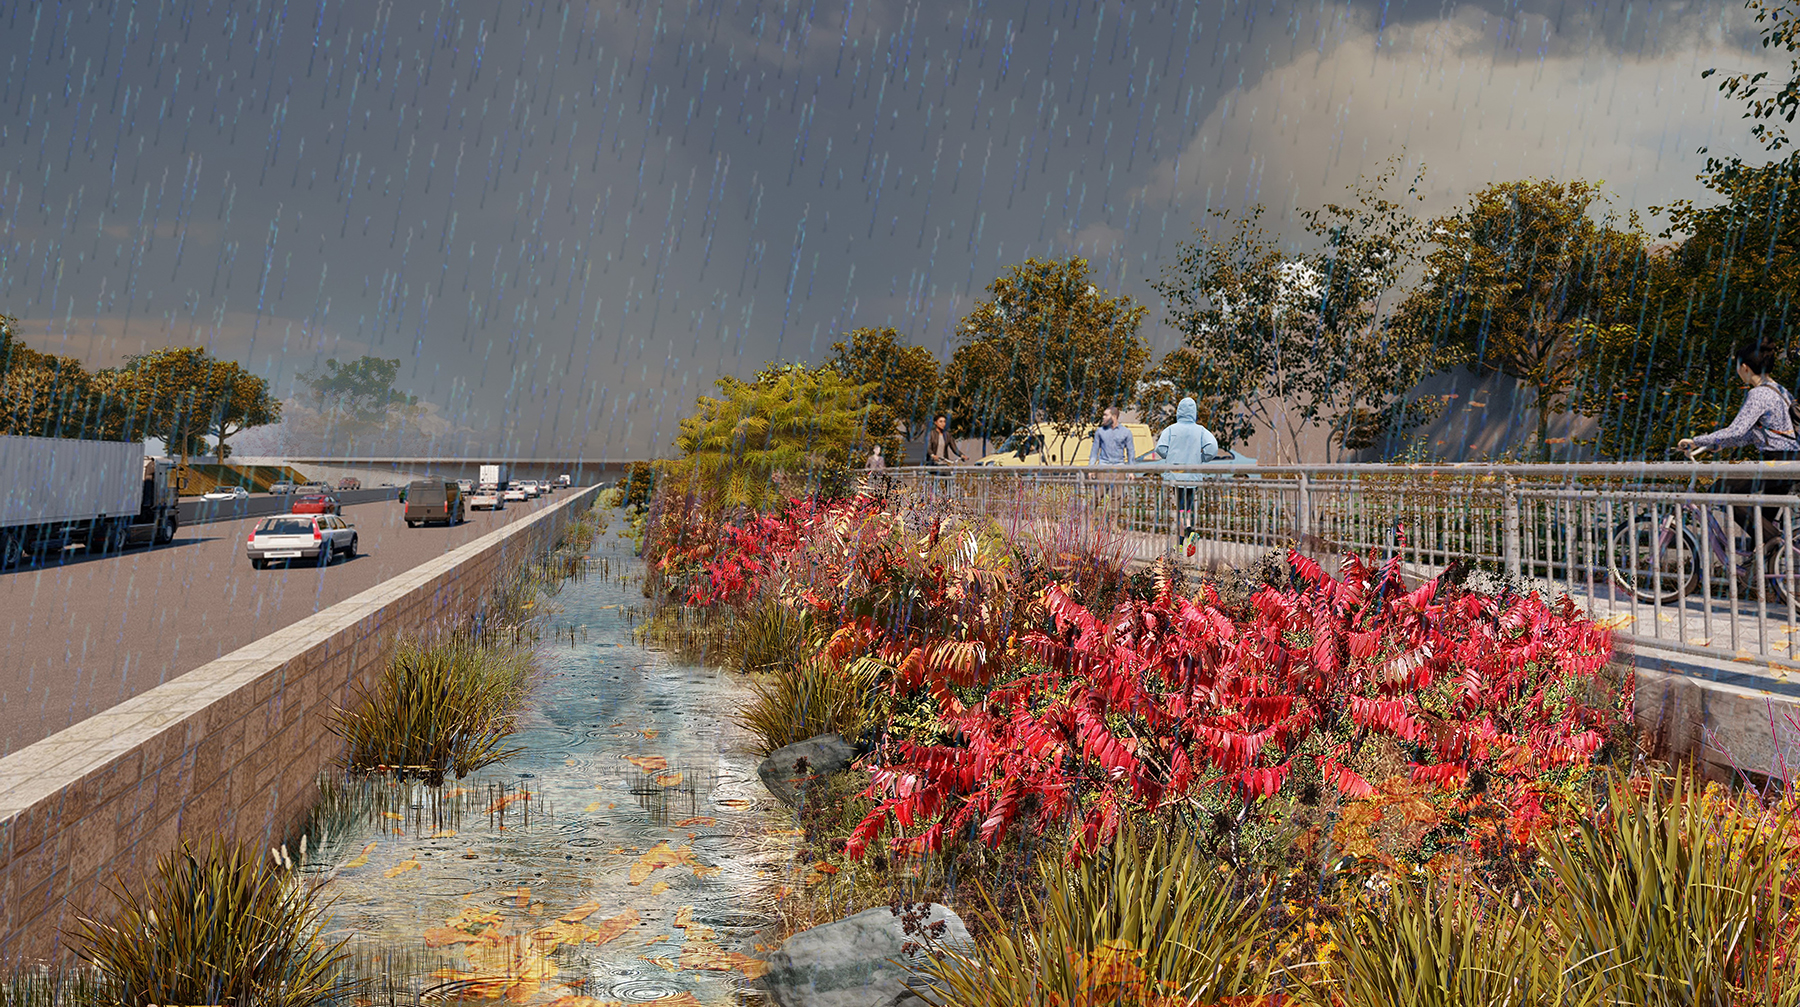 A rendering of the restored Tibbetts Brook and the Putnam Greenway looking south from West 236th Street. (Image courtesy of the New York City Department of Environmental Protection)